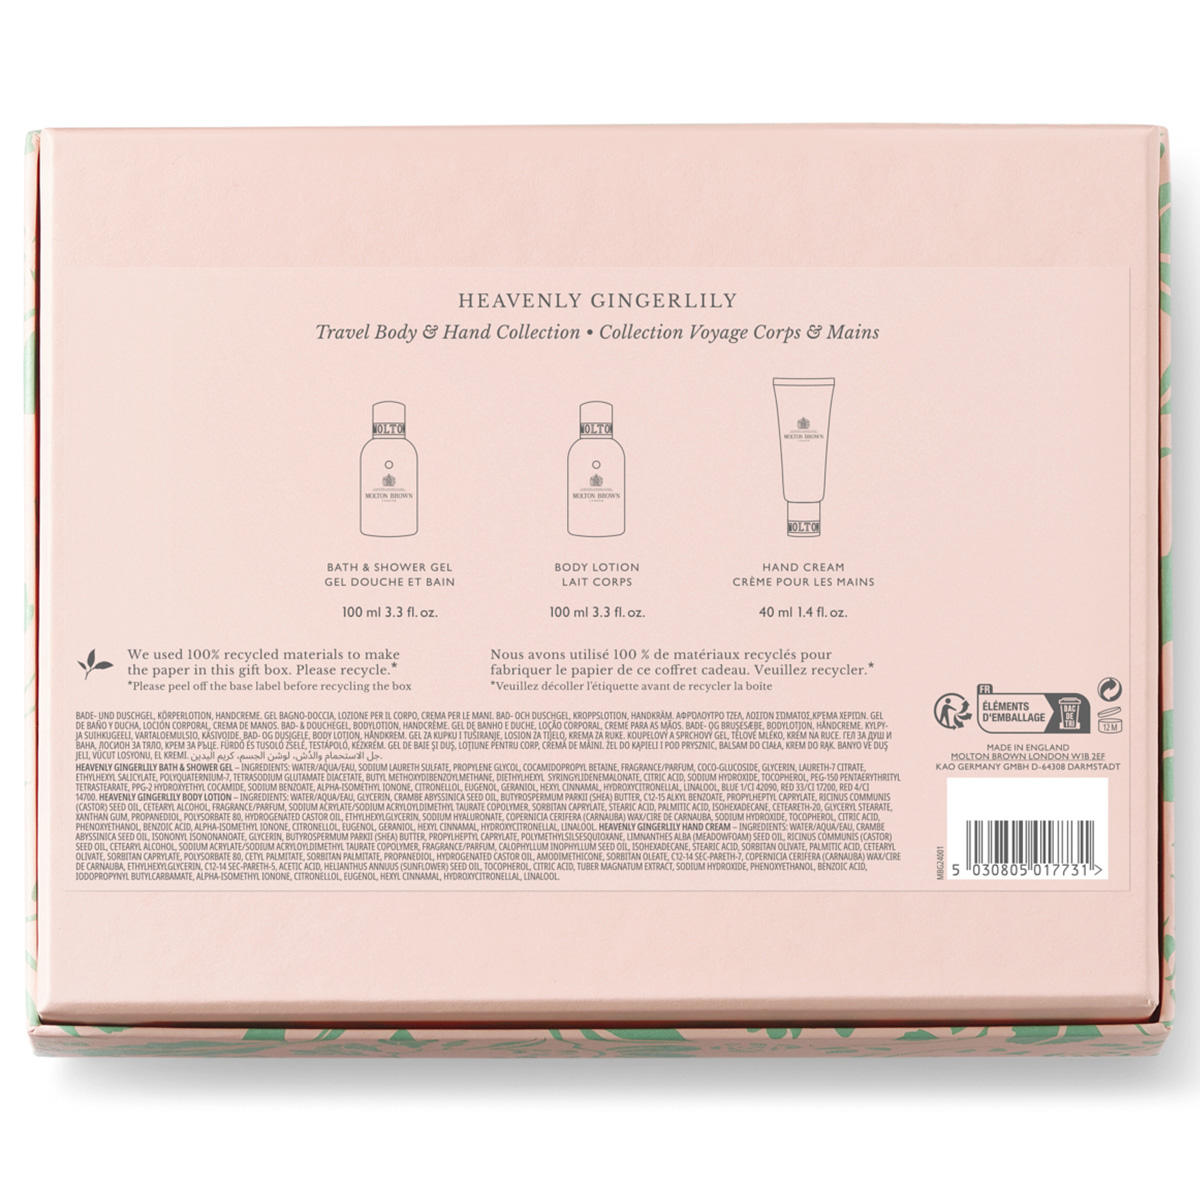 MOLTON BROWN Heavenly Gingerlily Travel Body & Hand Gift Set  - 3